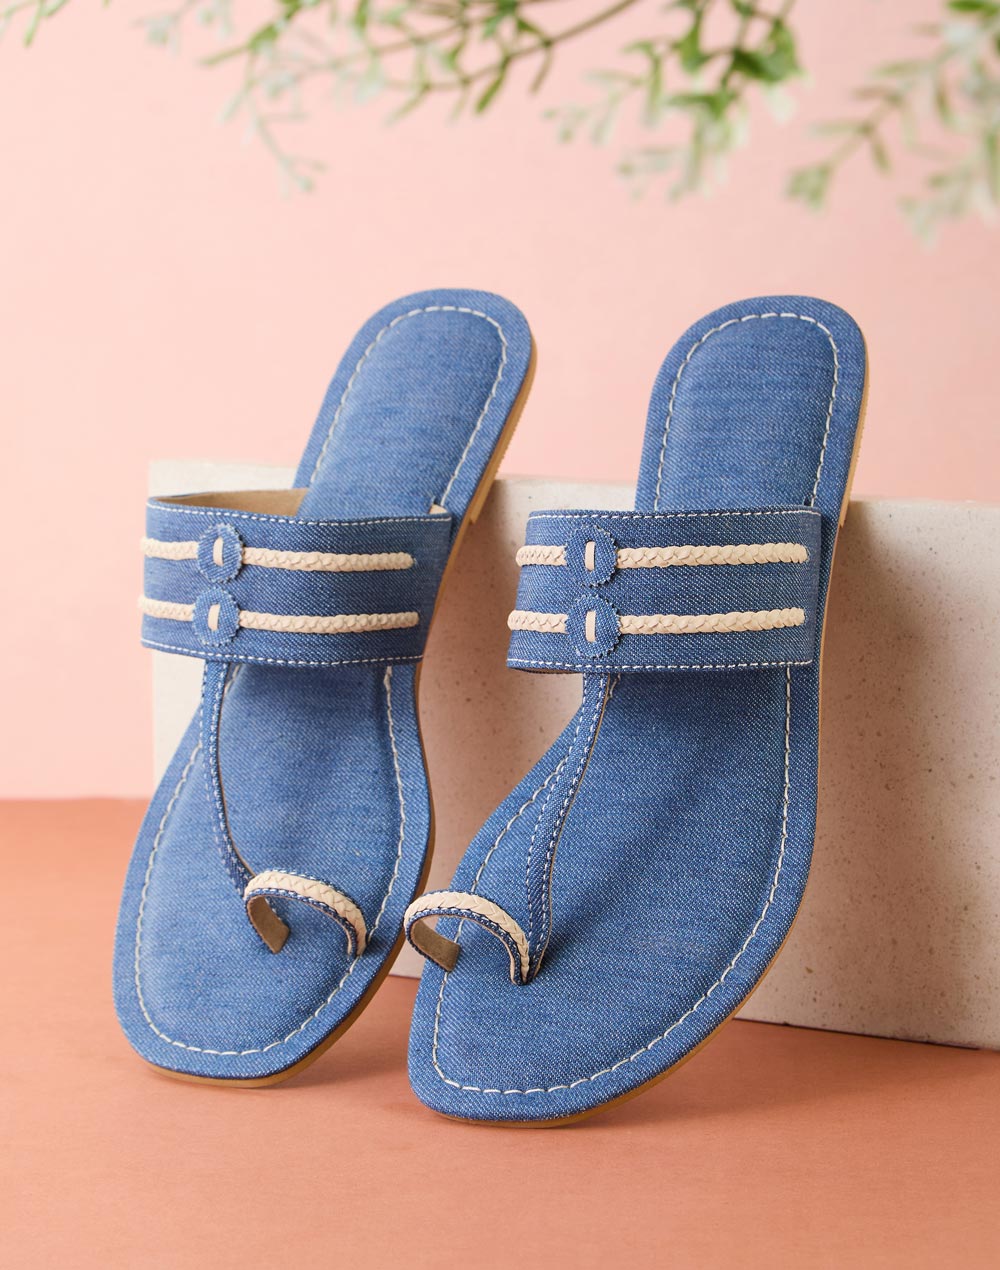 FENGSHAN Slippers Women Wide Width Ladies Fashion Cloth Small India